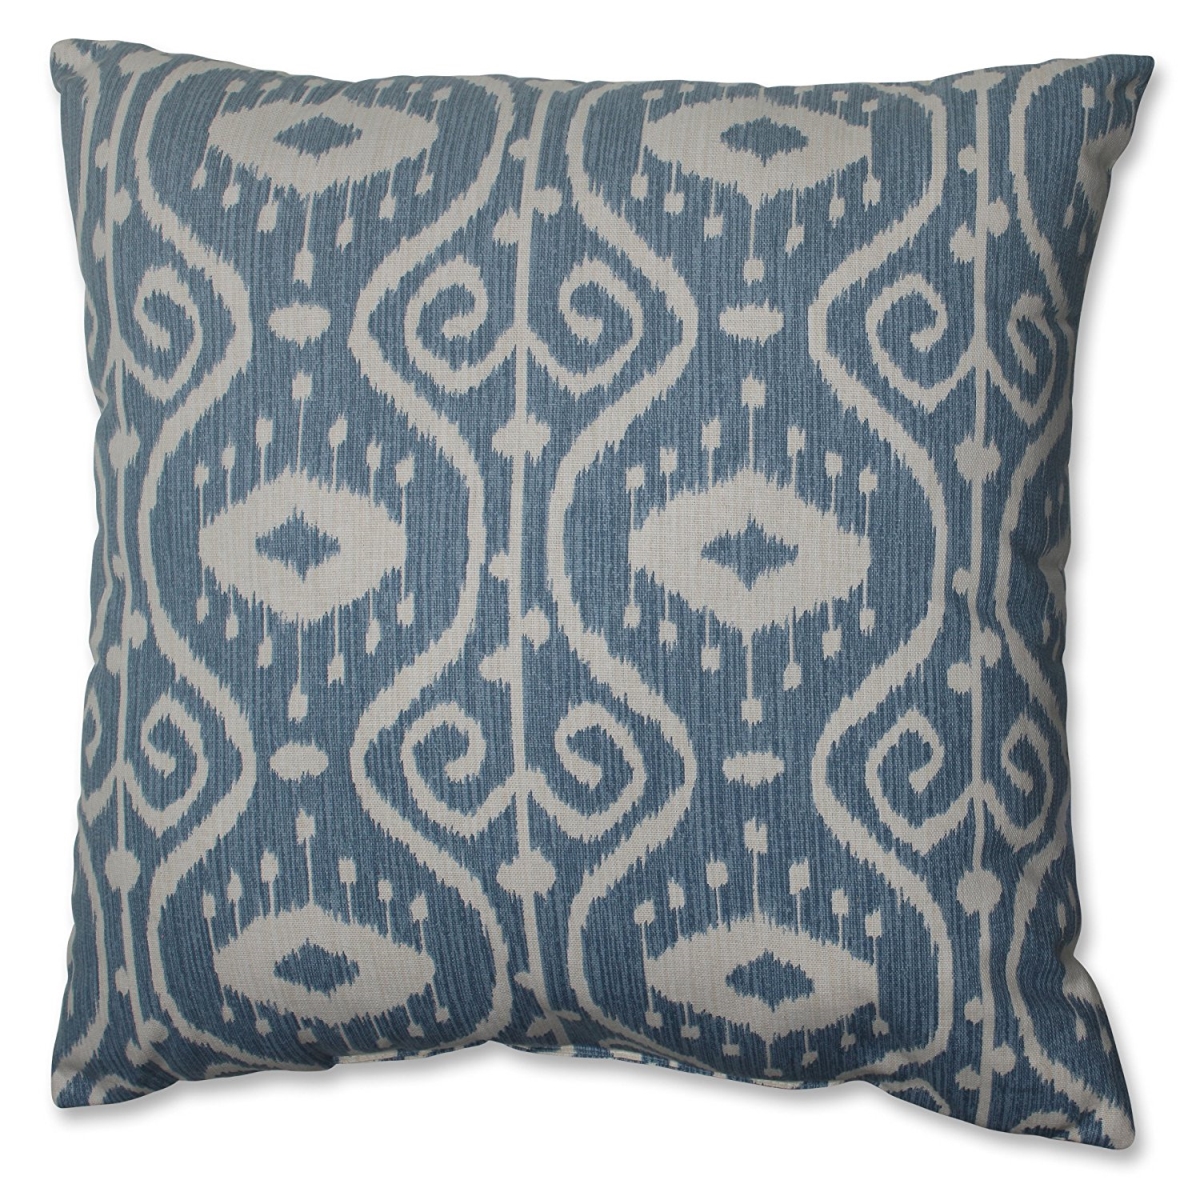 516950 Empire Yacht 18-inch Throw Pillow - Blue-off-white